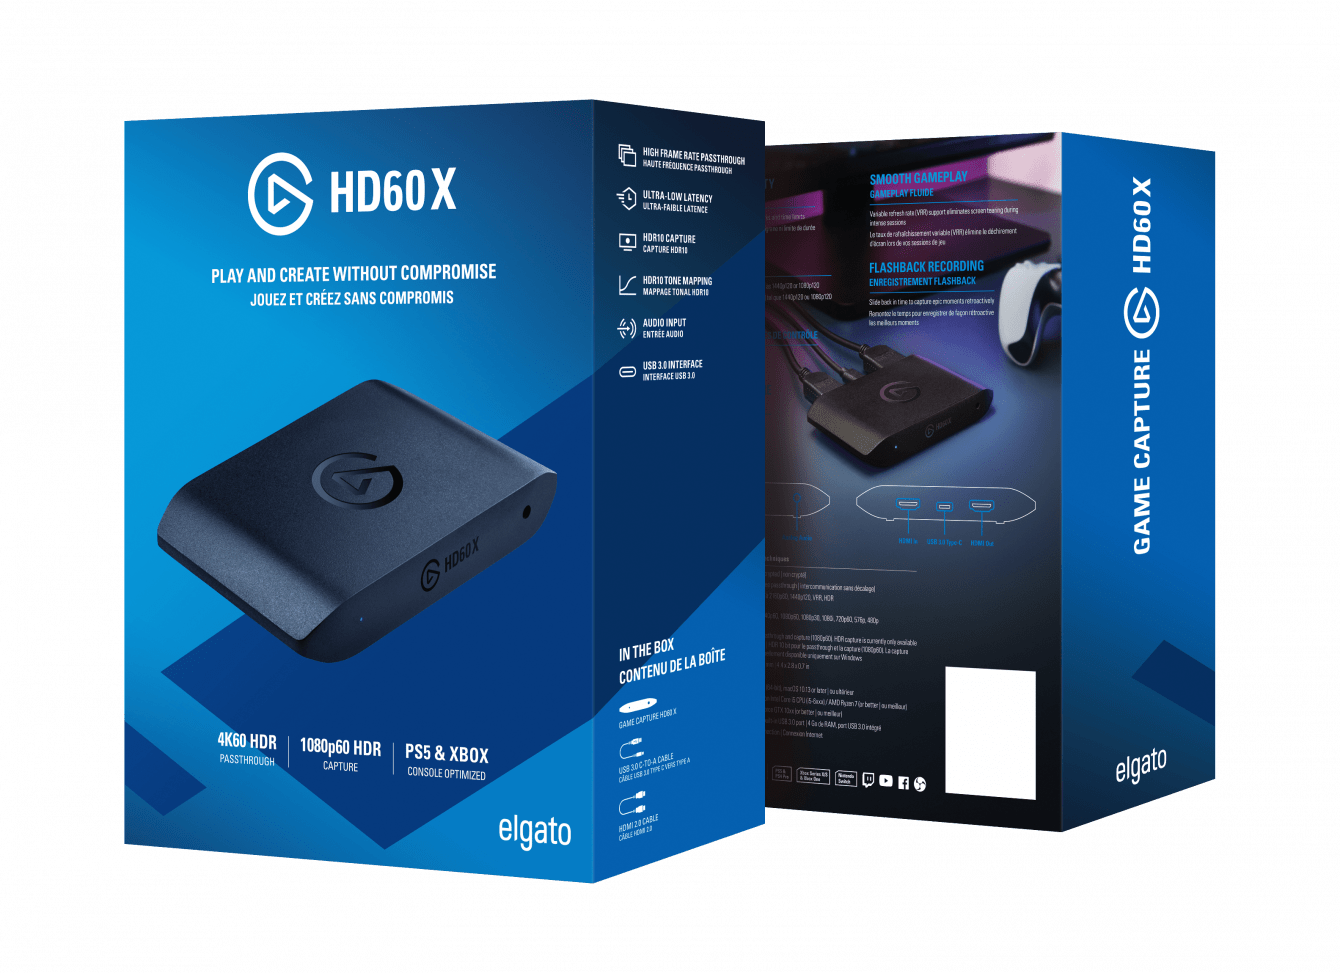 Elgato HD60X review: the evolution of the acquisition